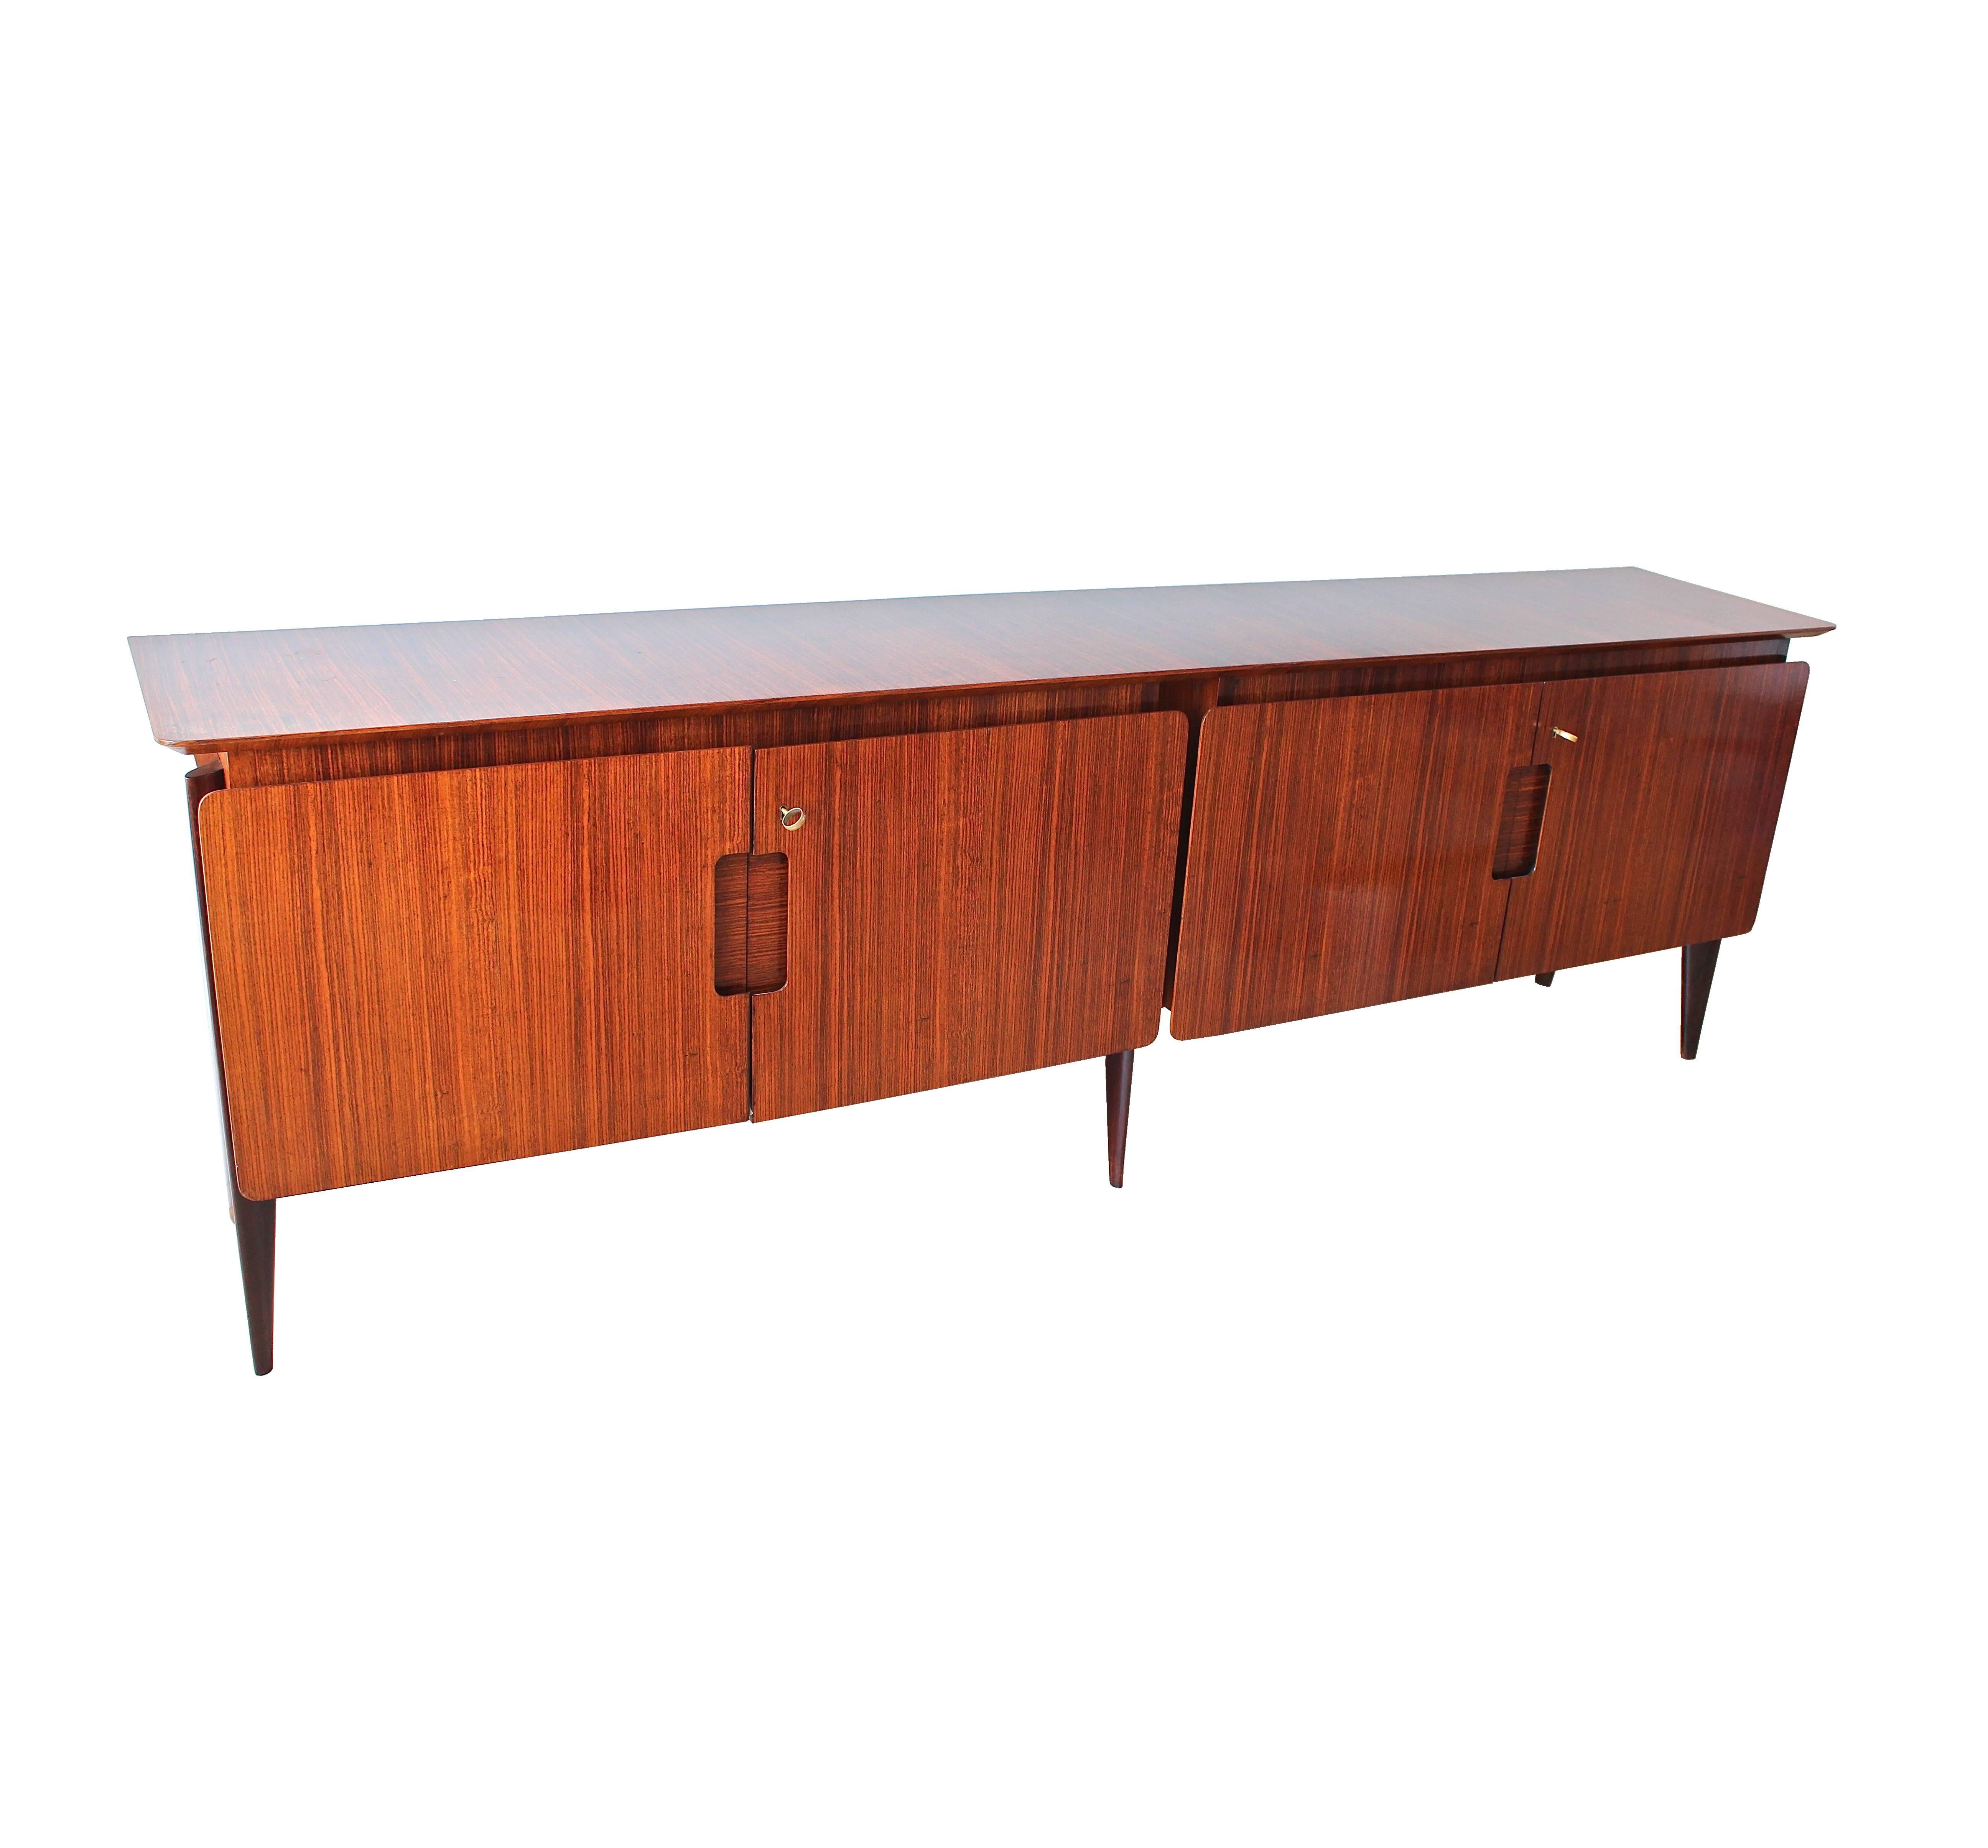 Rare four-door sideboard in rosewood by Ico Parisi.
Right side interior has four-drawers with brass handles and the left side interior has a single shelf.
Manufactured by Rizzi, Cantu, Italy and documented in the Archivio del Design di Ico Parisi.